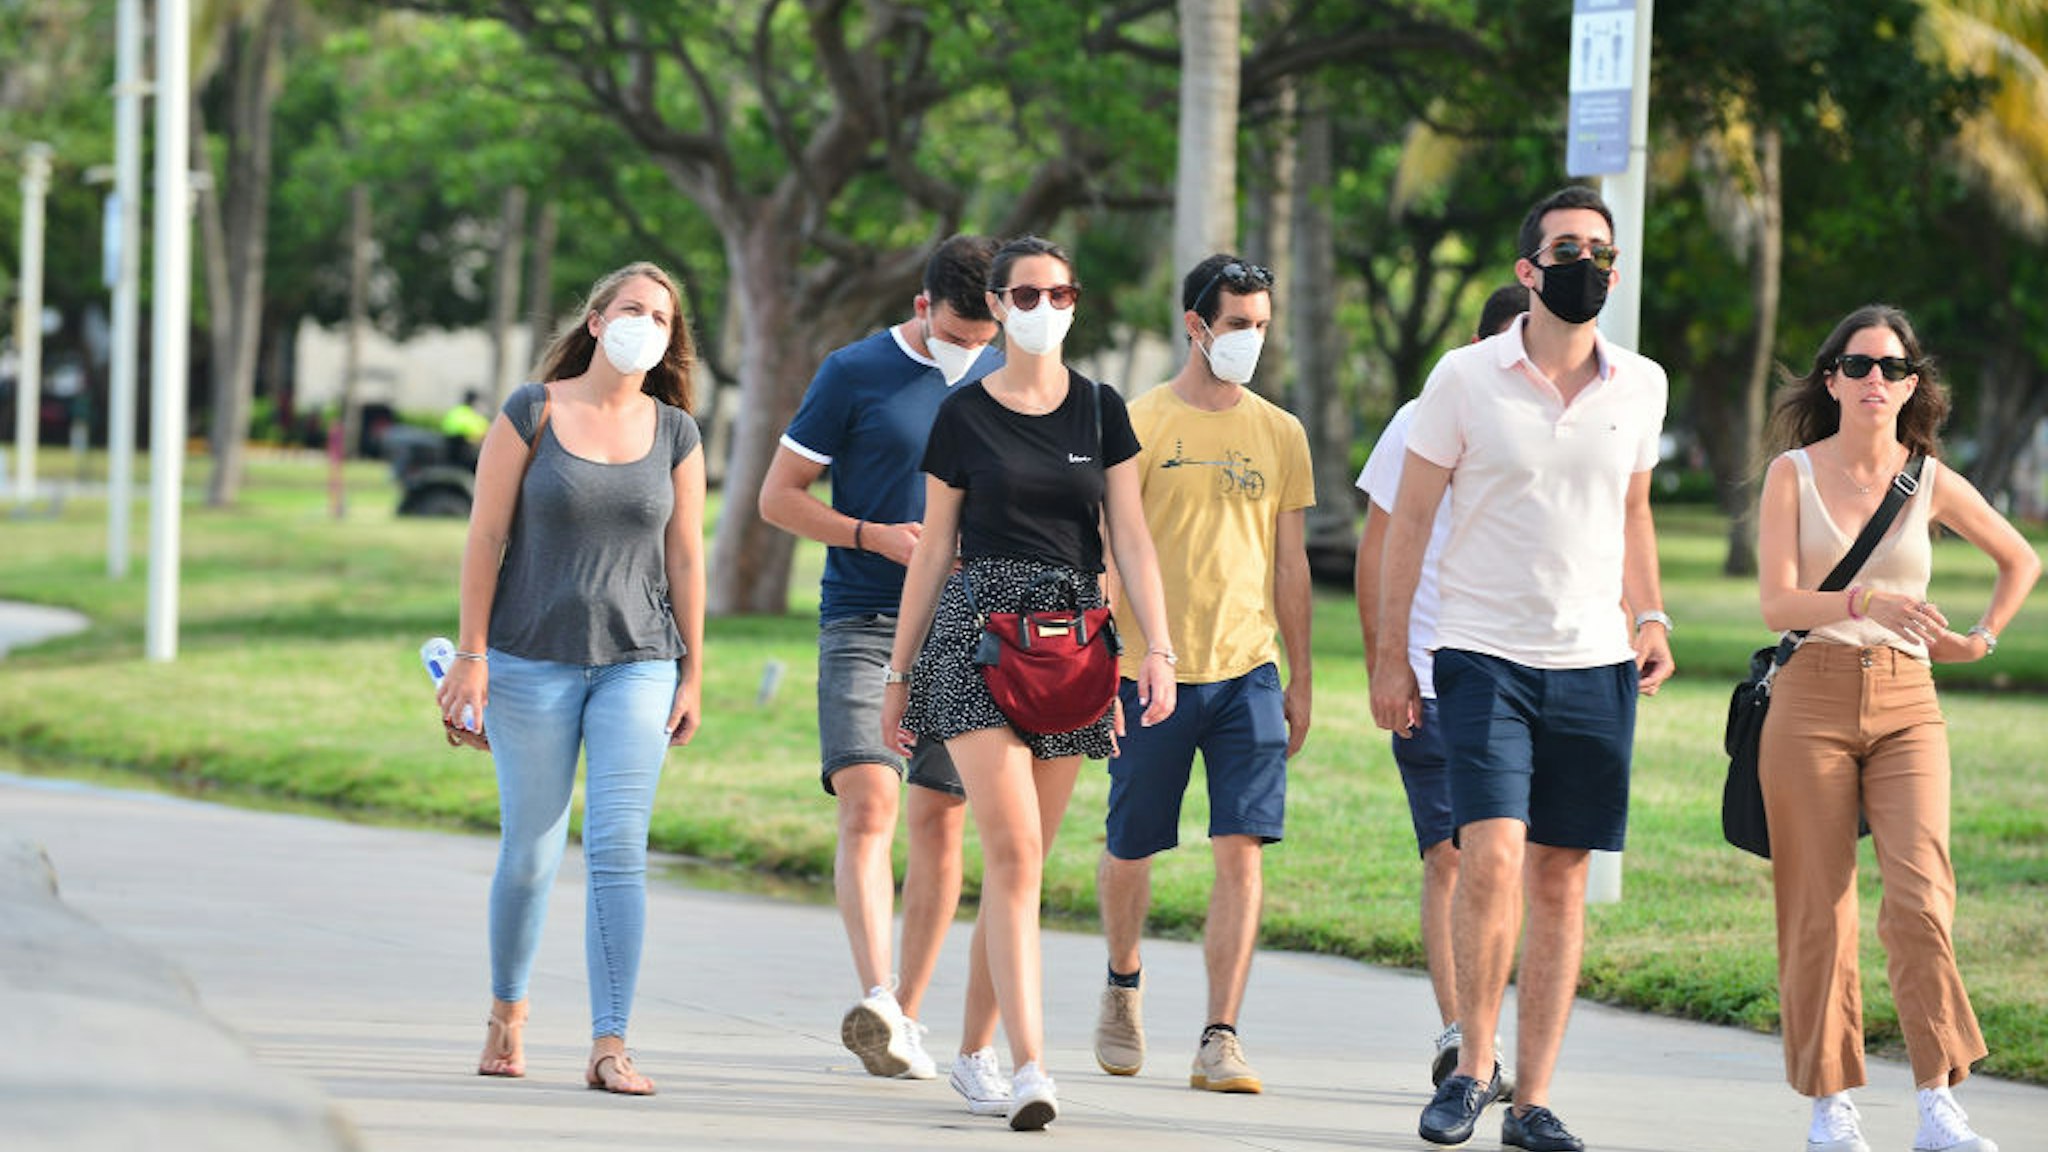 MIAMI BEACH, FL - JULY 06: People seen walking on the beach side walk some wearing mask and some not wearing a face mask on July 06, 2020 in Miami Beach, Florida. Miami Beach has mandated that masks be worn in public, where social distancing is not possible. With a surge in COVID-19 cases, Mayor Carlos Gimenez on Monday has ordered the closing of all restaurants, gyms and fitness centers, ballrooms and short-term vacation rentals. Mayor Gimenez will allow beaches to re-open on July 7th after being closed over the 4th of July weekend. (Photo by Johnny Louis/Getty Images)